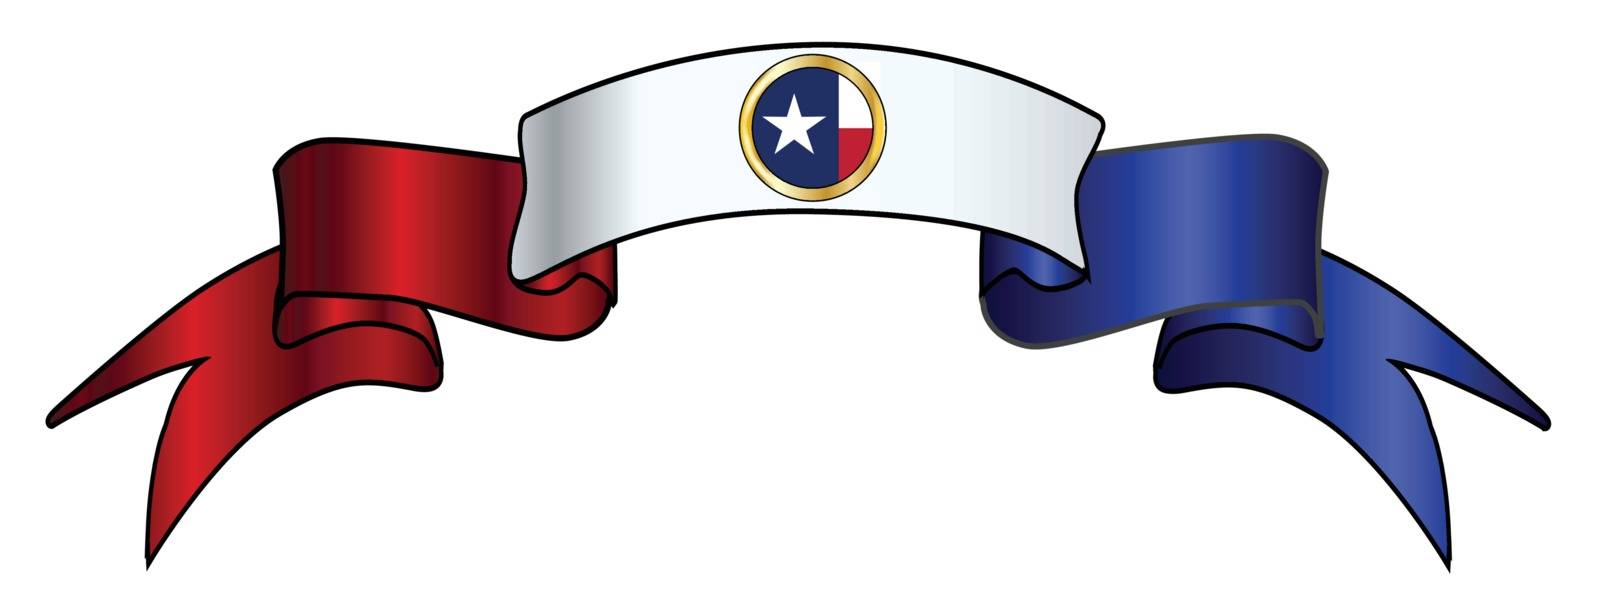 A red white and blue satin Texas flag icon ribbon